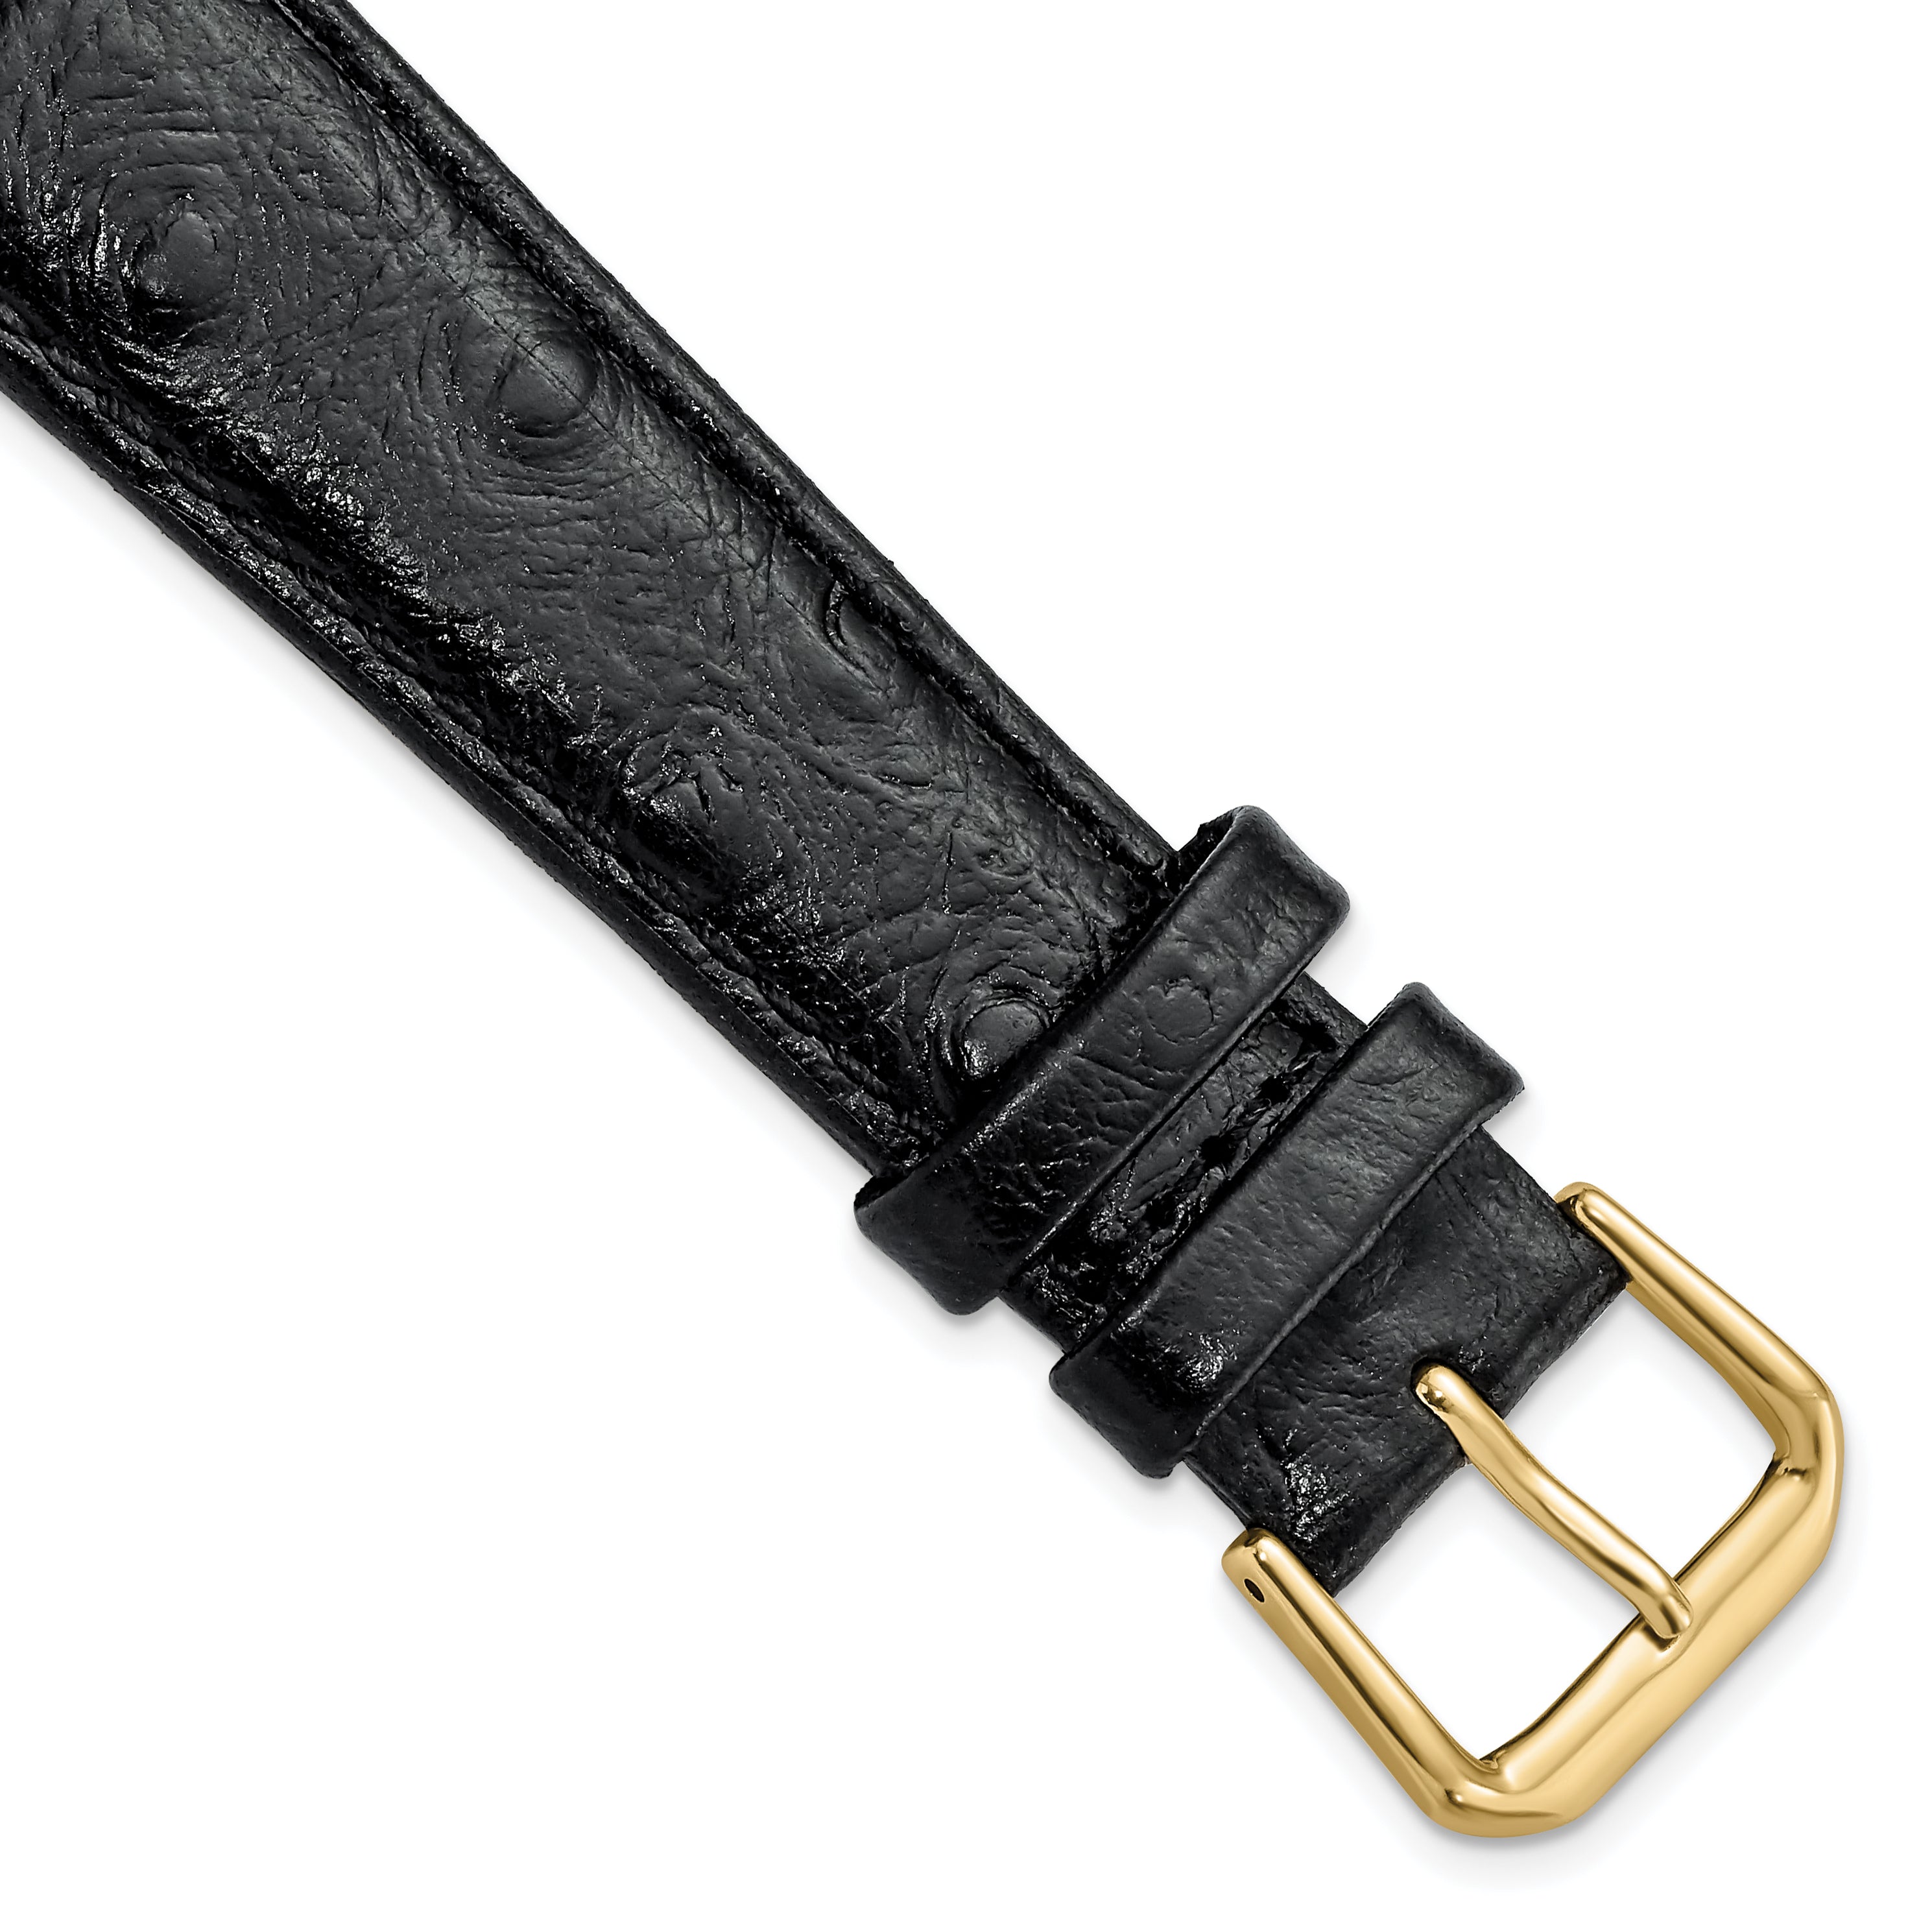 DeBeer 19mm Black Ostrich Grain Leather with Gold-tone Buckle 7.5 inch Watch Band